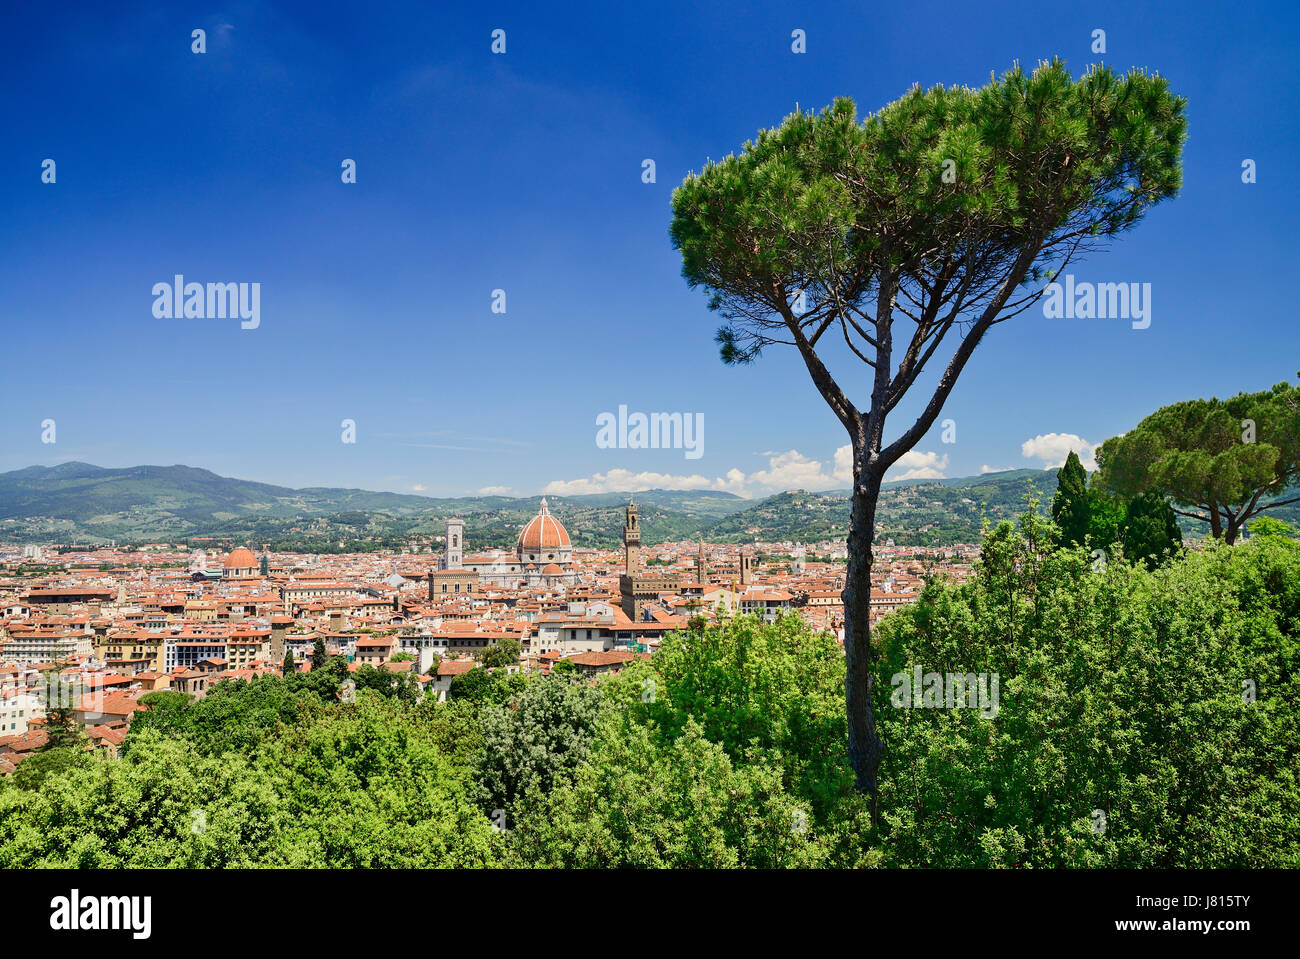 Italy, Tuscany, Florence, View of the city from Forte Belvedere near Boboli Gardens. Stock Photo